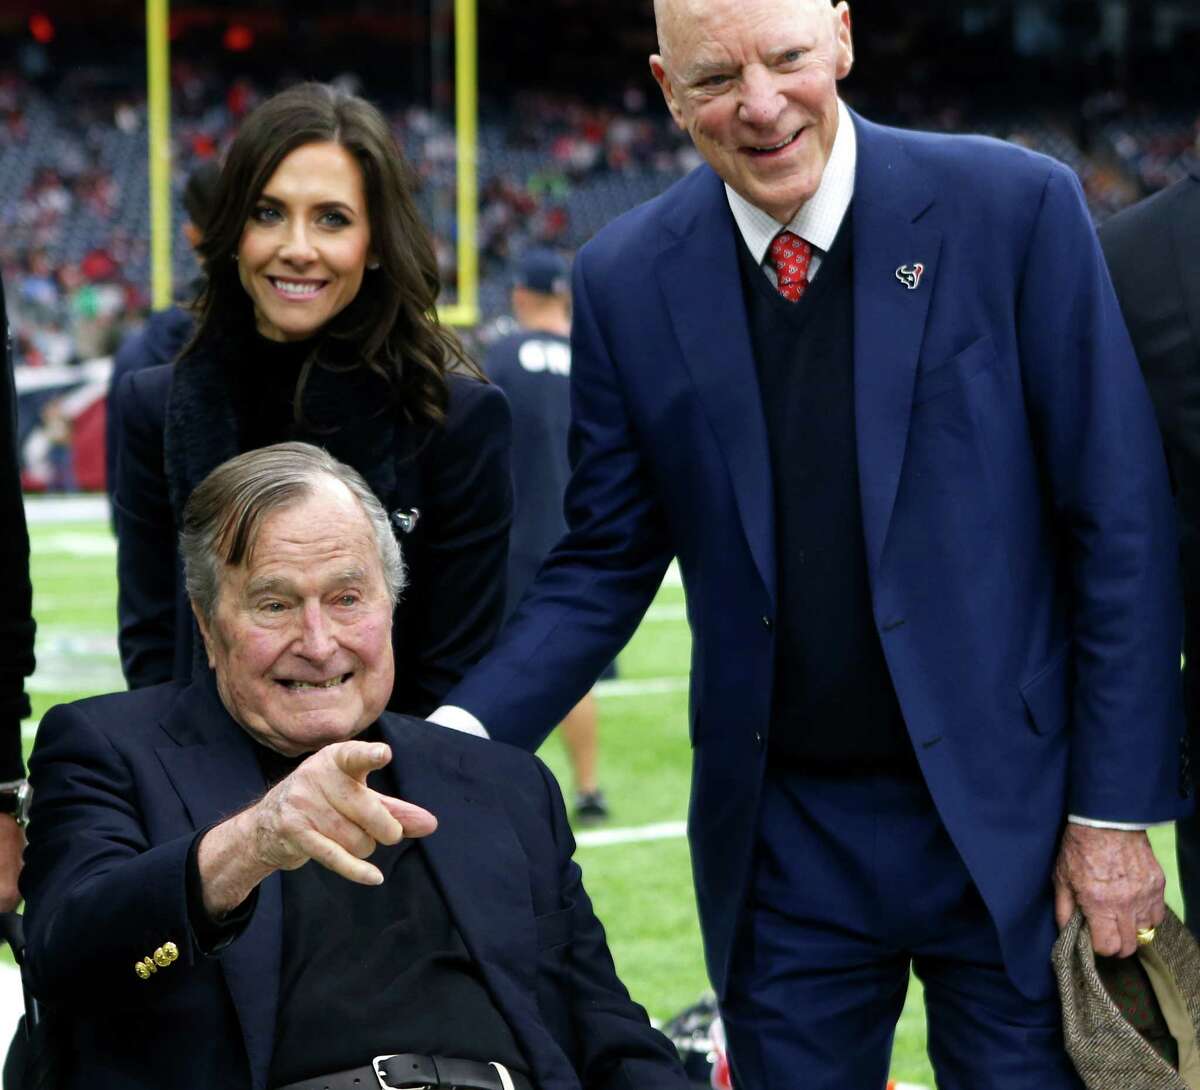 Former President George H. W. Bush, front-left, poses for a photo with Hannah McNair, rear-left, and Houston Texans owner Bob McNair, right, before an AFC Wild Card Playoff game at NRG Stadium on Saturday, Jan. 7, 2017, in Houston. Take a look back at the incredible political career of George H.W. Bush.